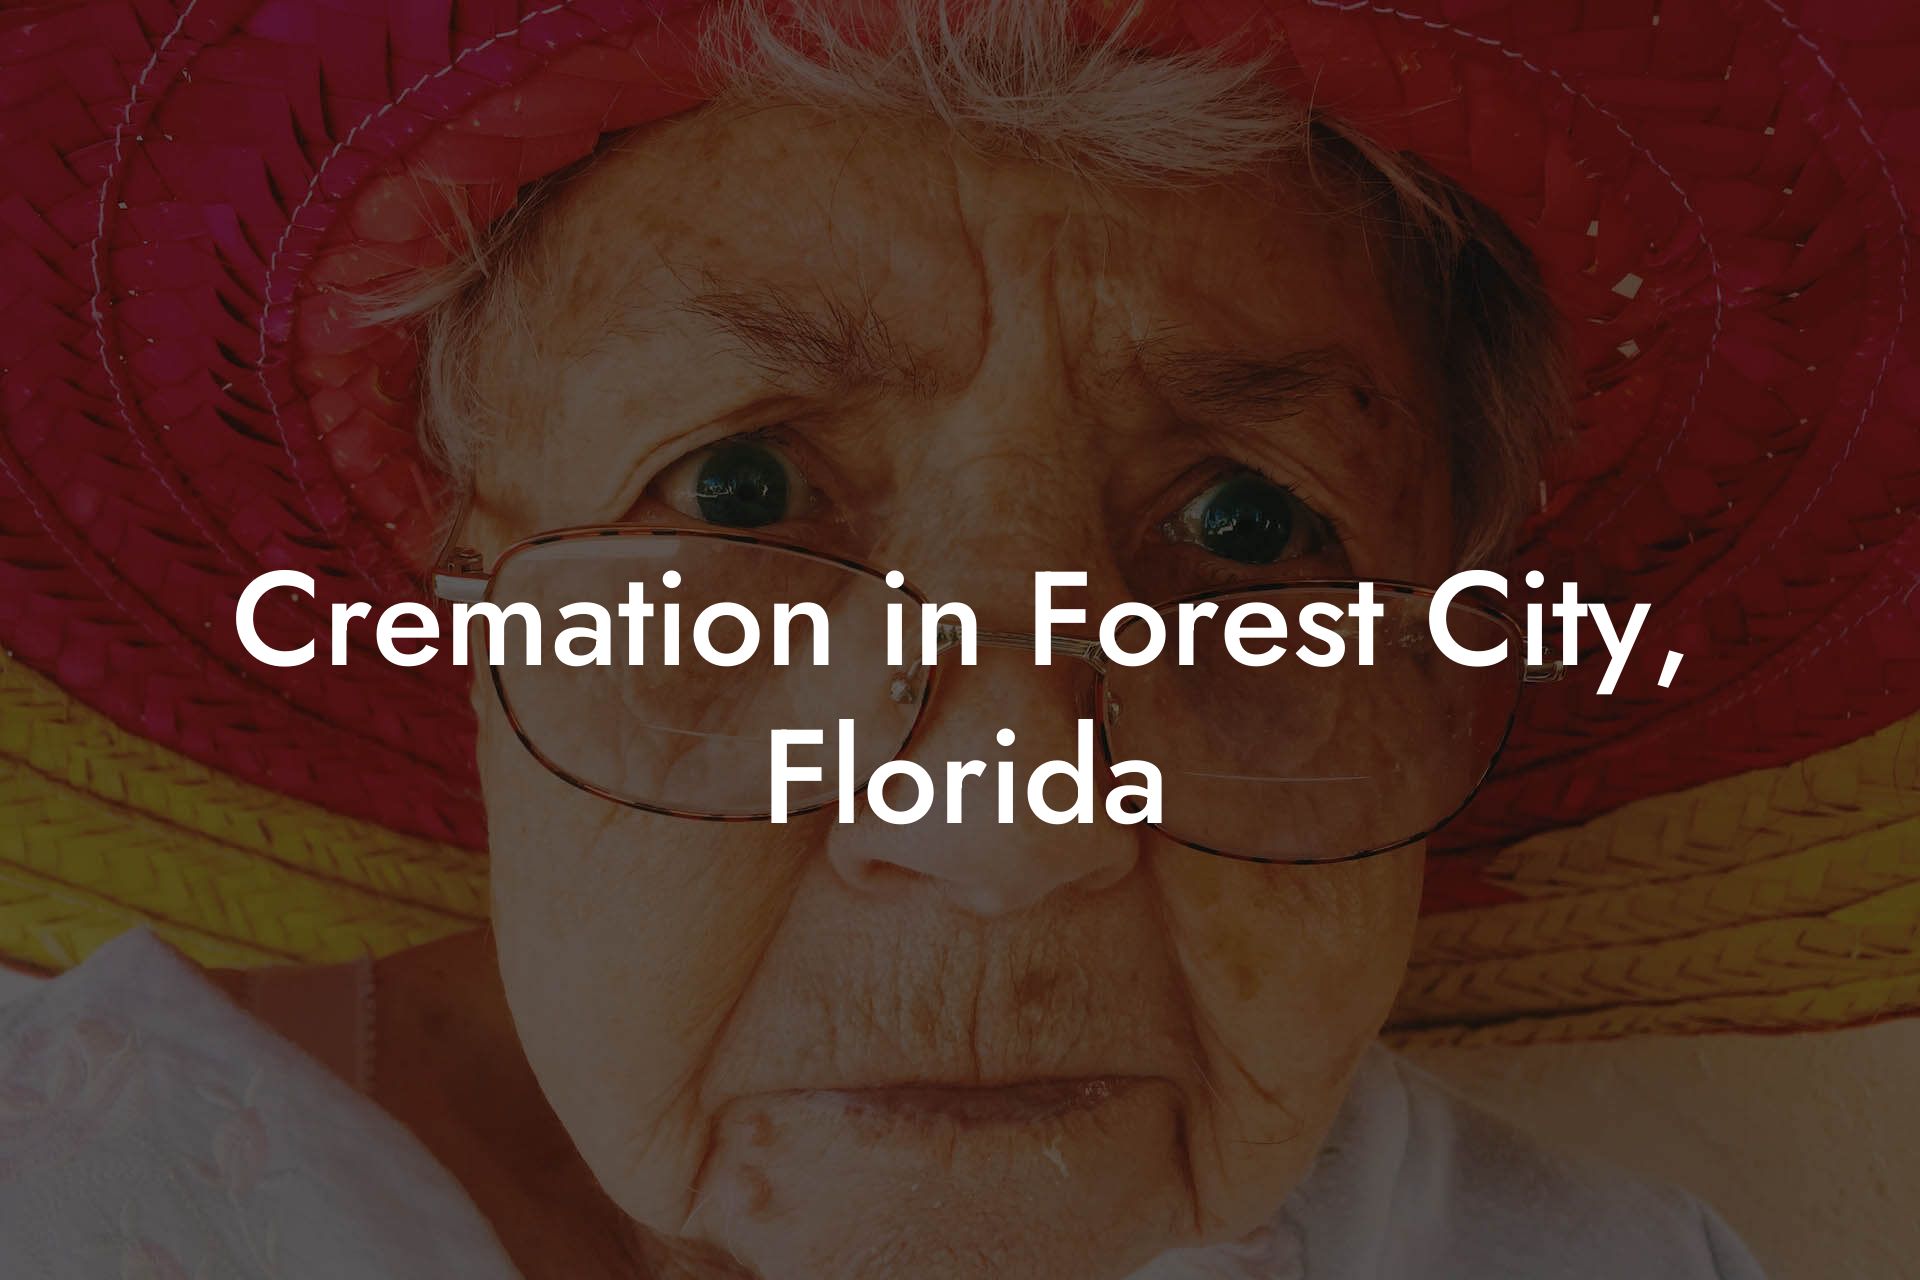 Cremation in Forest City, Florida